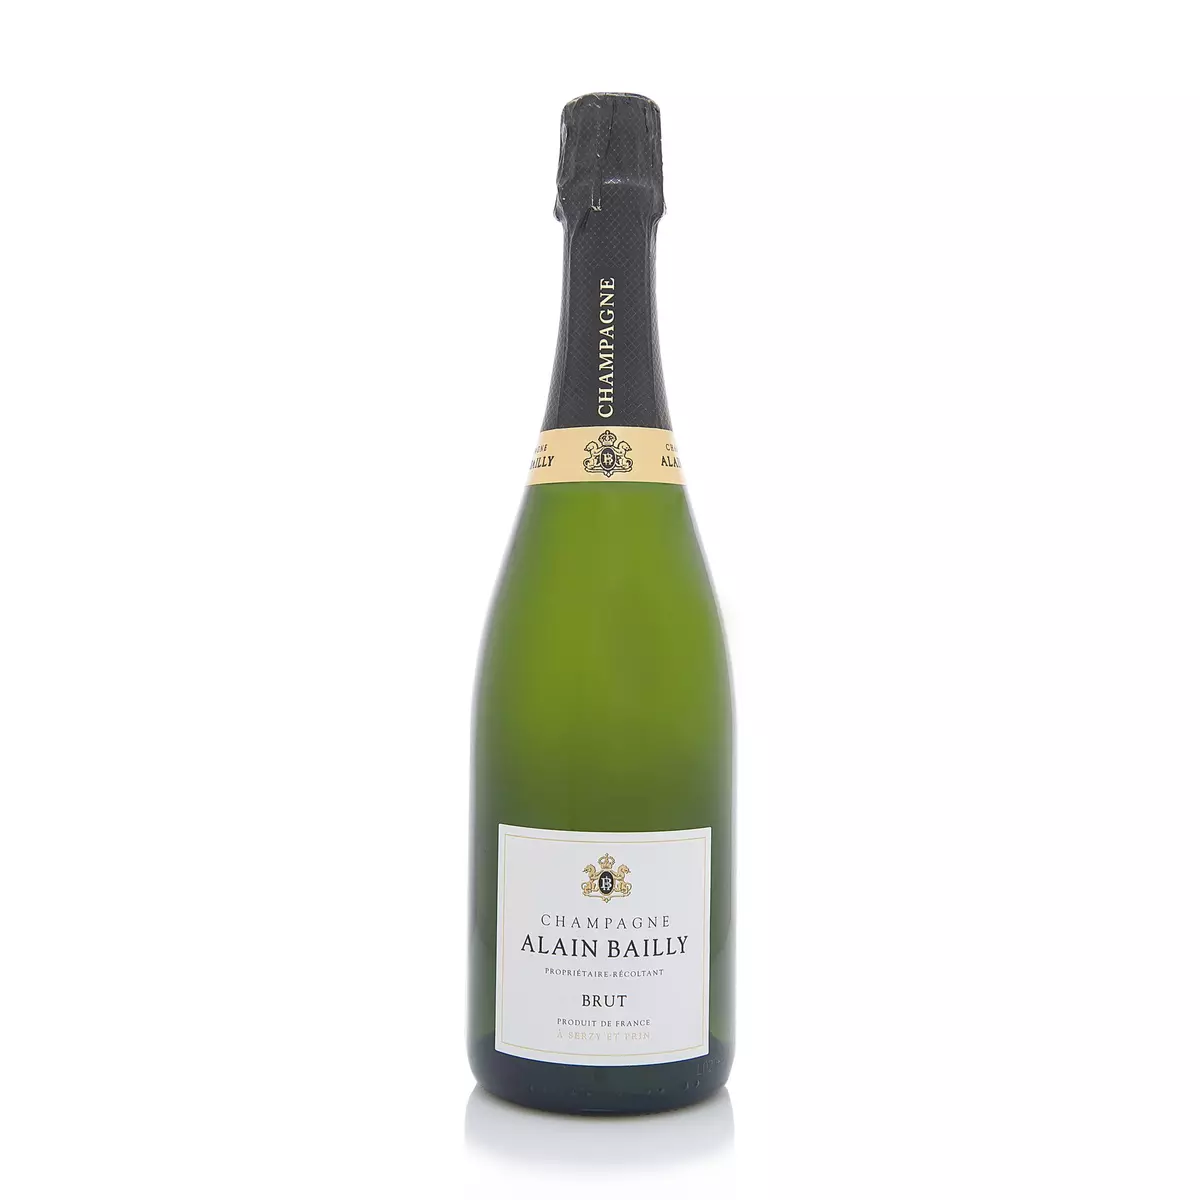 ALAIN BAILLY AOP Champagne brut tradition 75cl